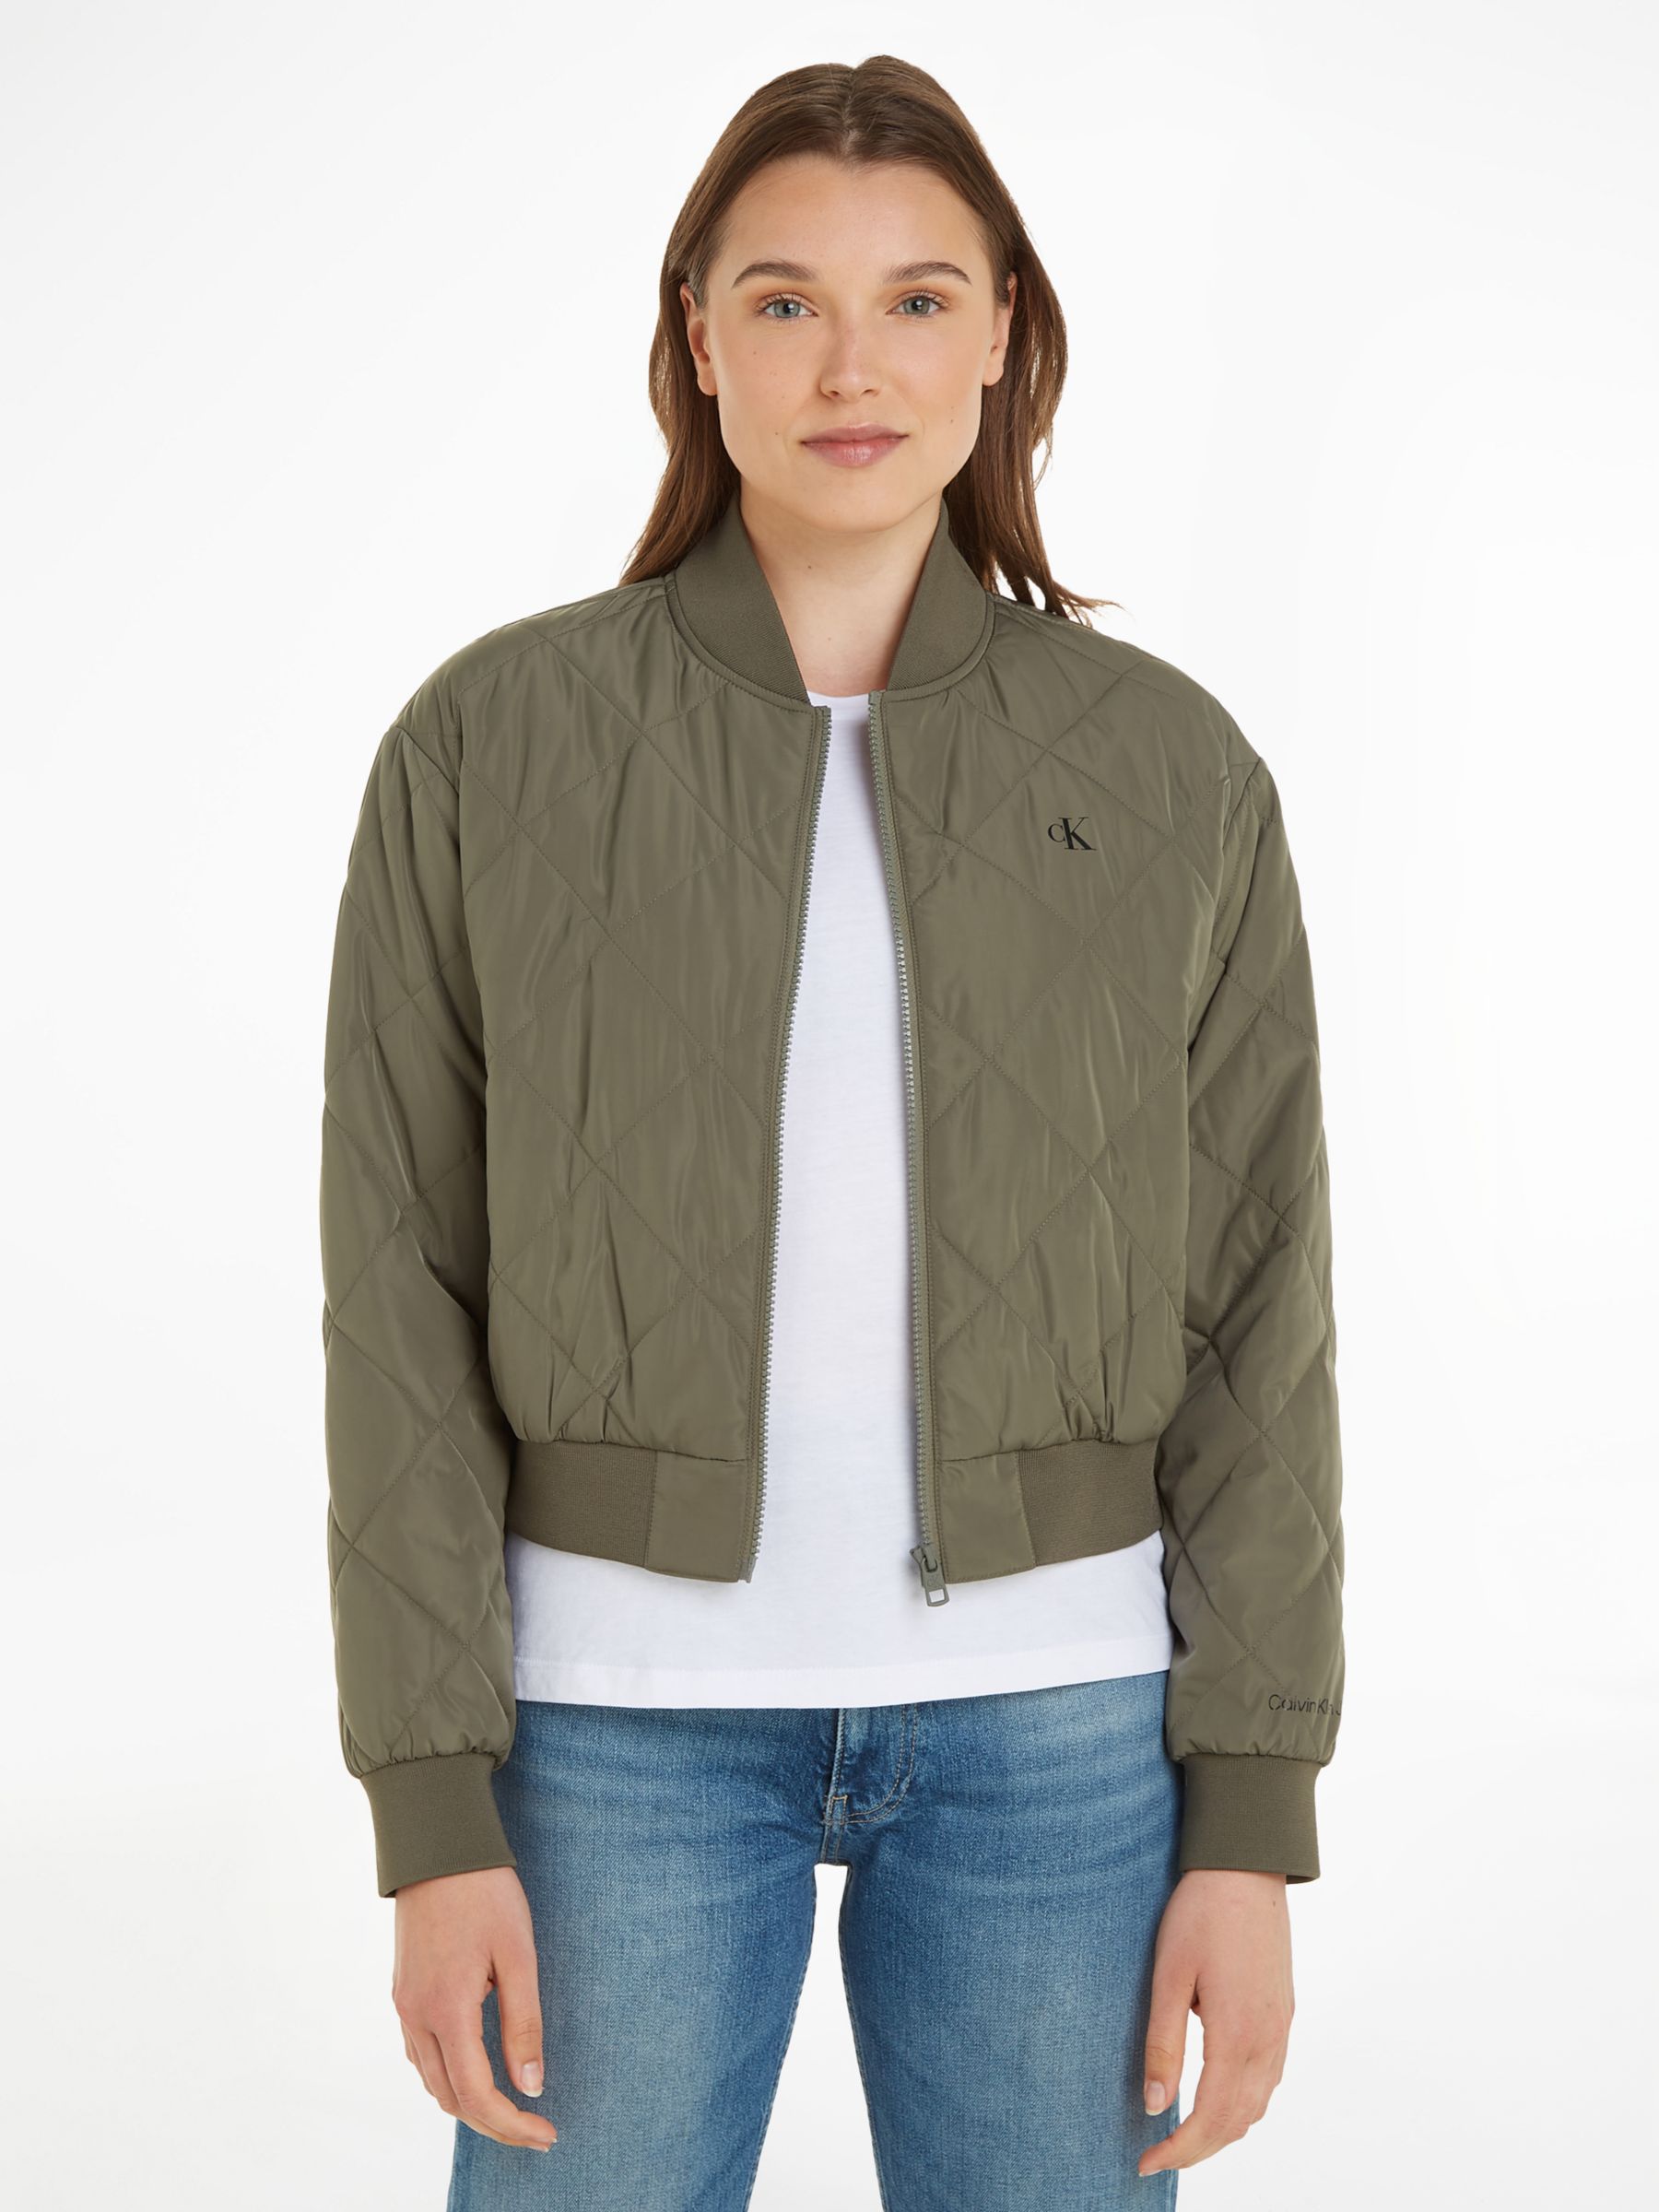 Calvin Klein Quilted Bomber Jacket, Dusty Olive, L